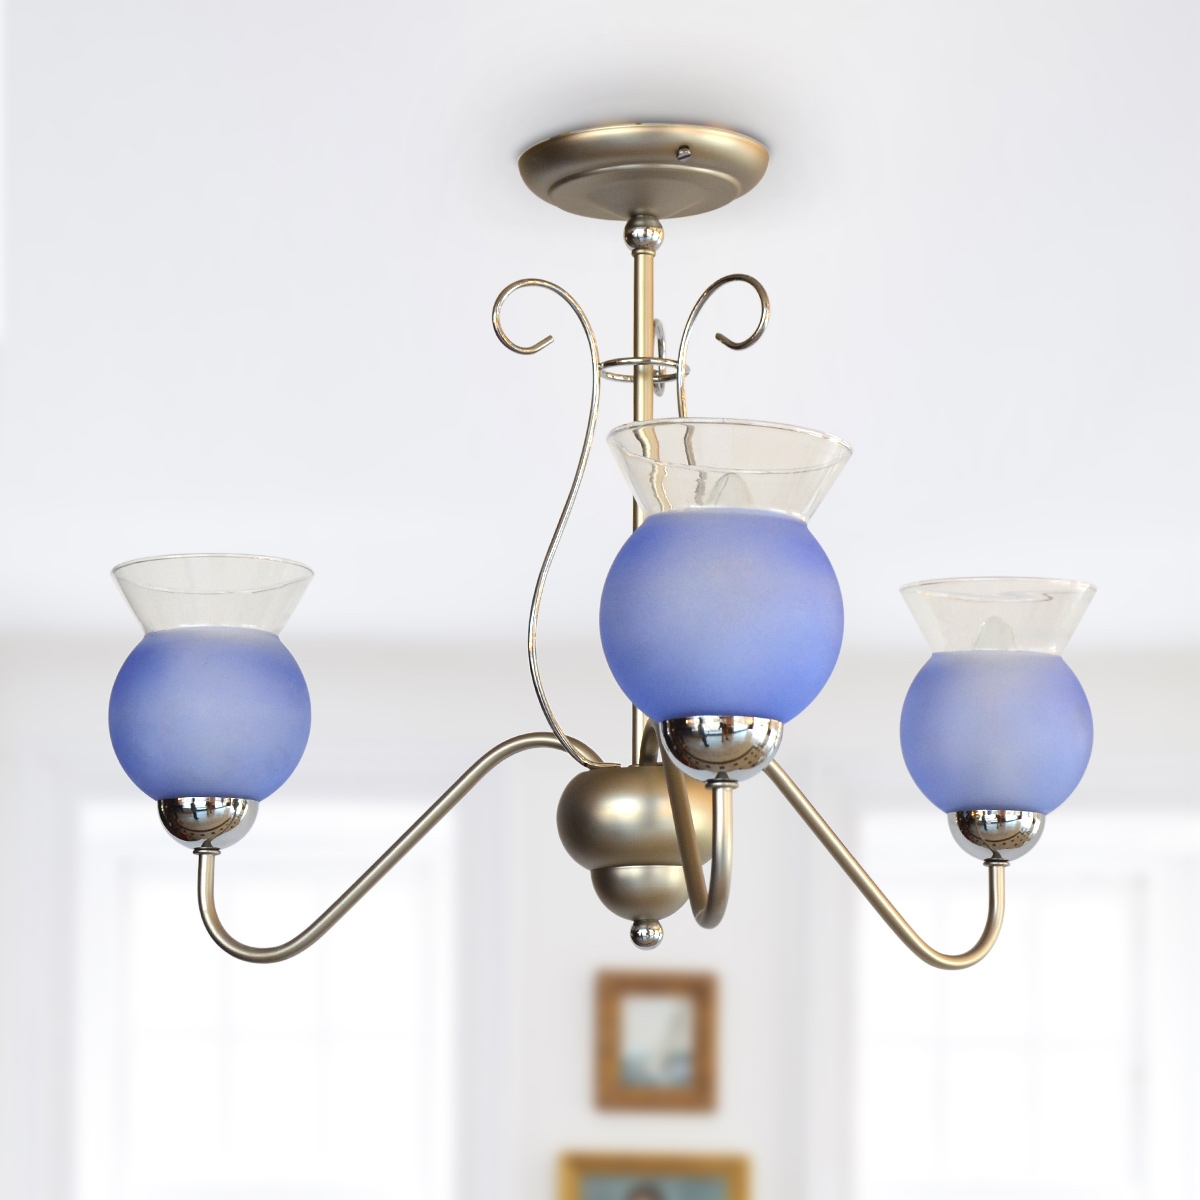 Italy Uplight Chandelier 3 Arms 246 - Gray Blue Glass